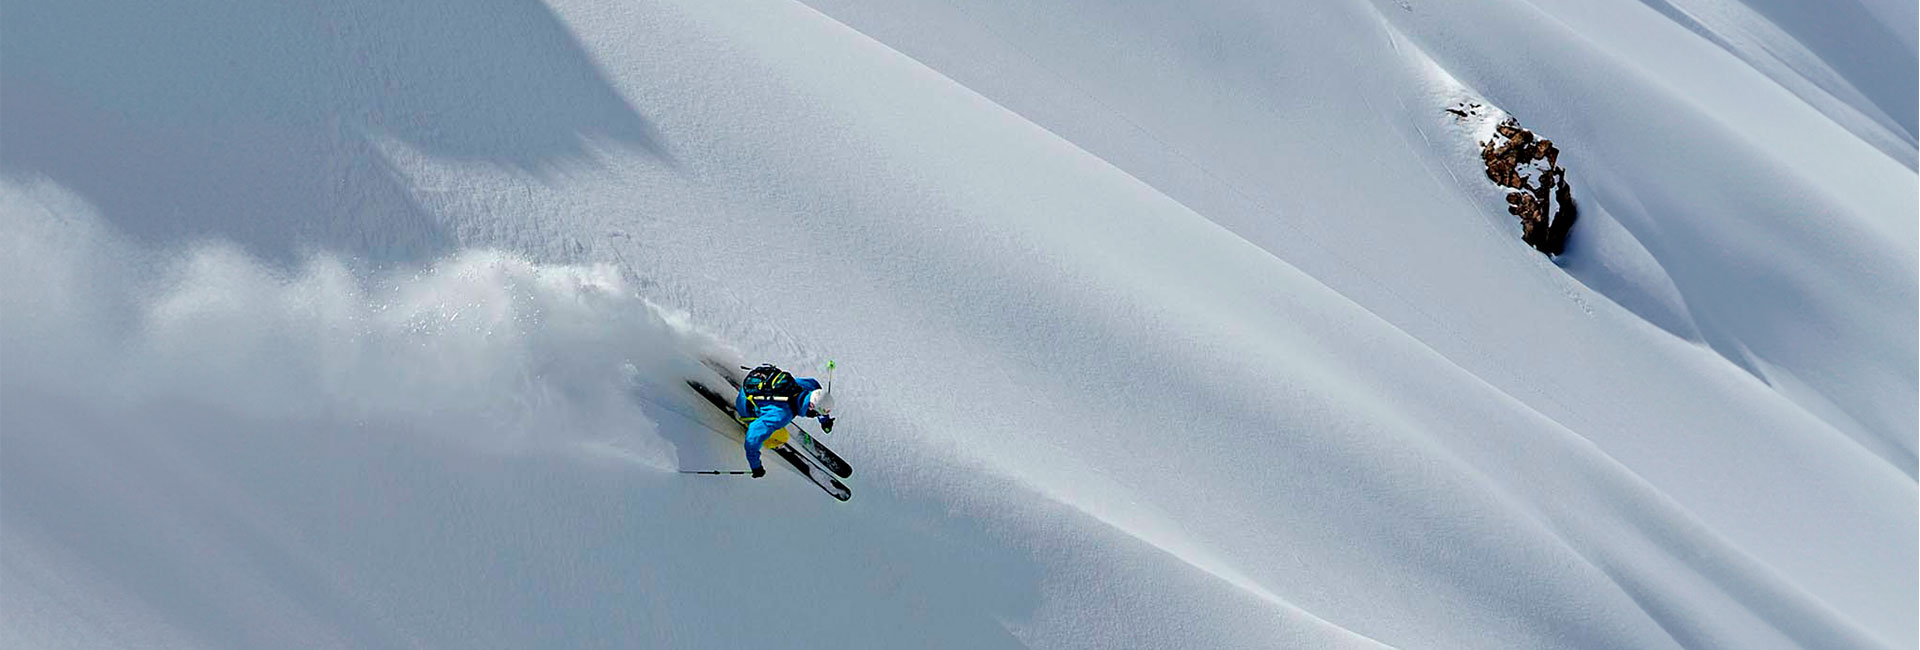 skier turning from above header